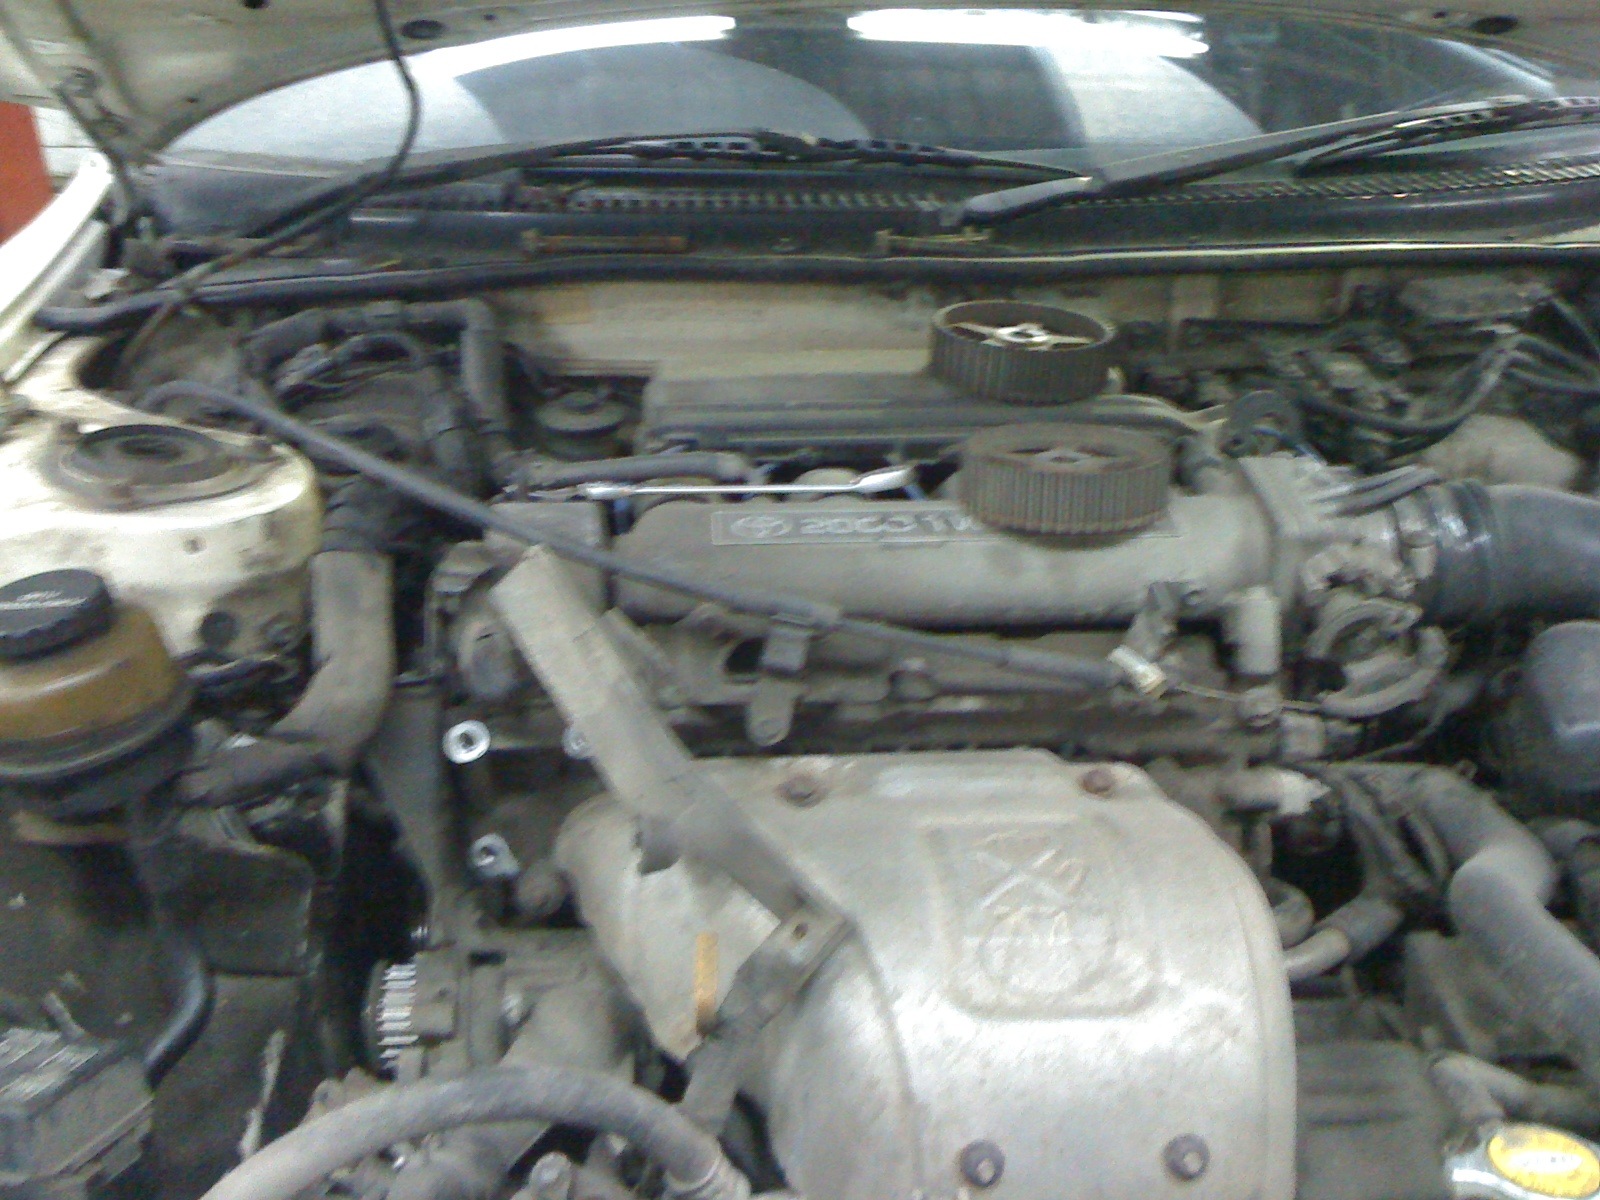 Patched up heart - Toyota Celica 20 L 1993